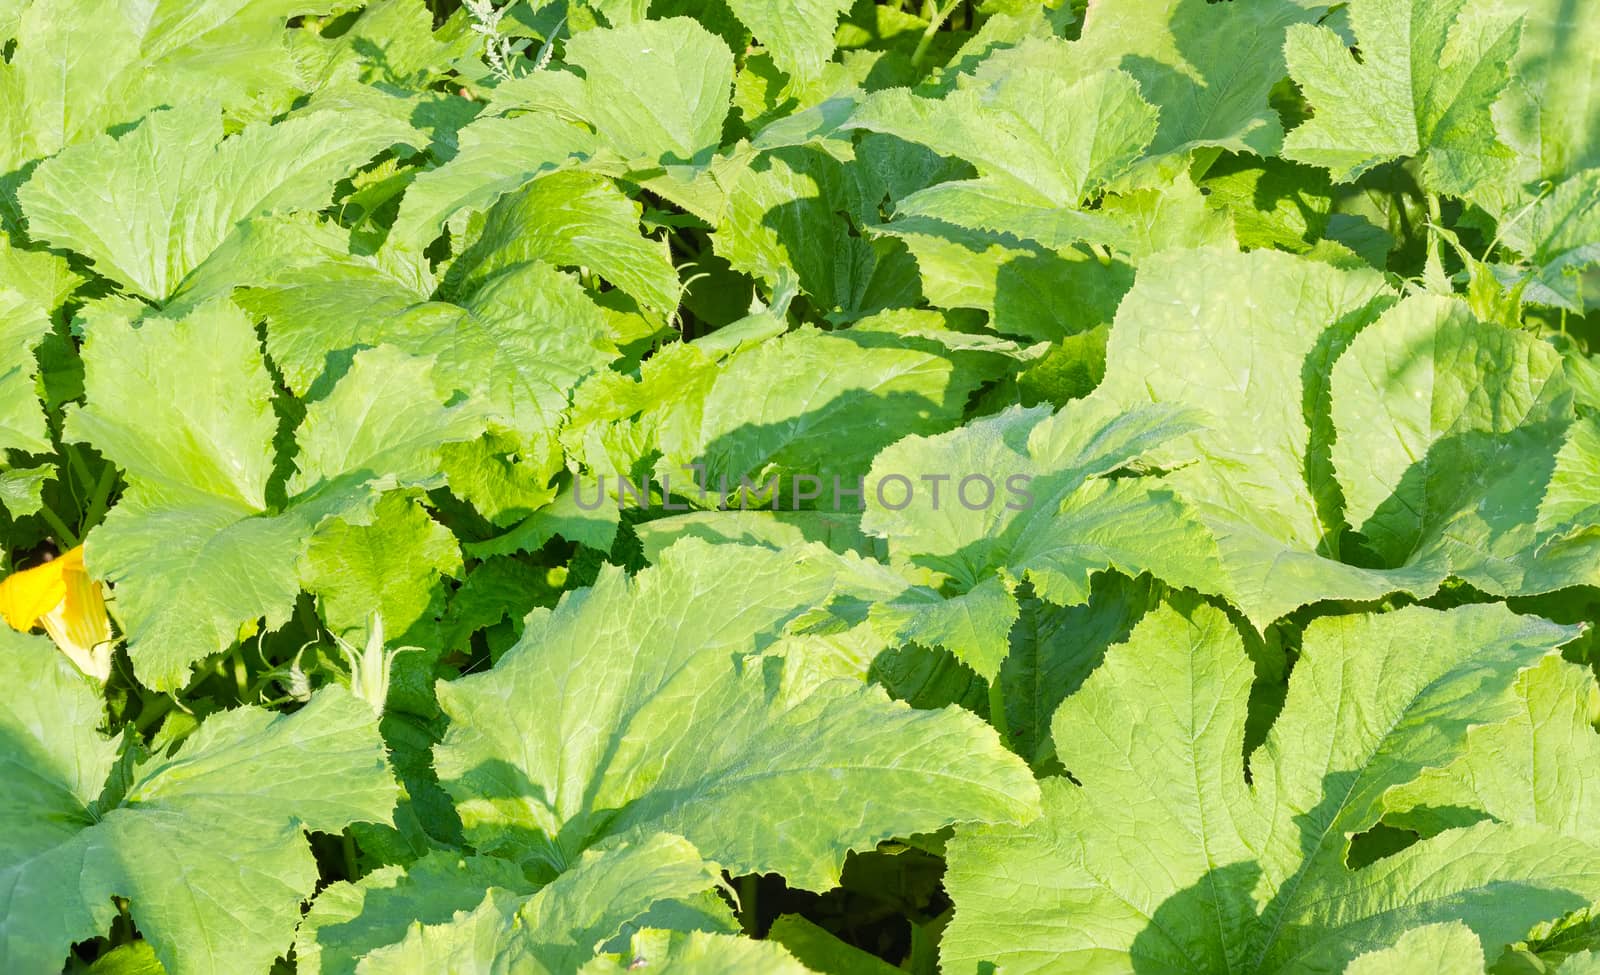 Background of a field of vegetable marrow by anmbph